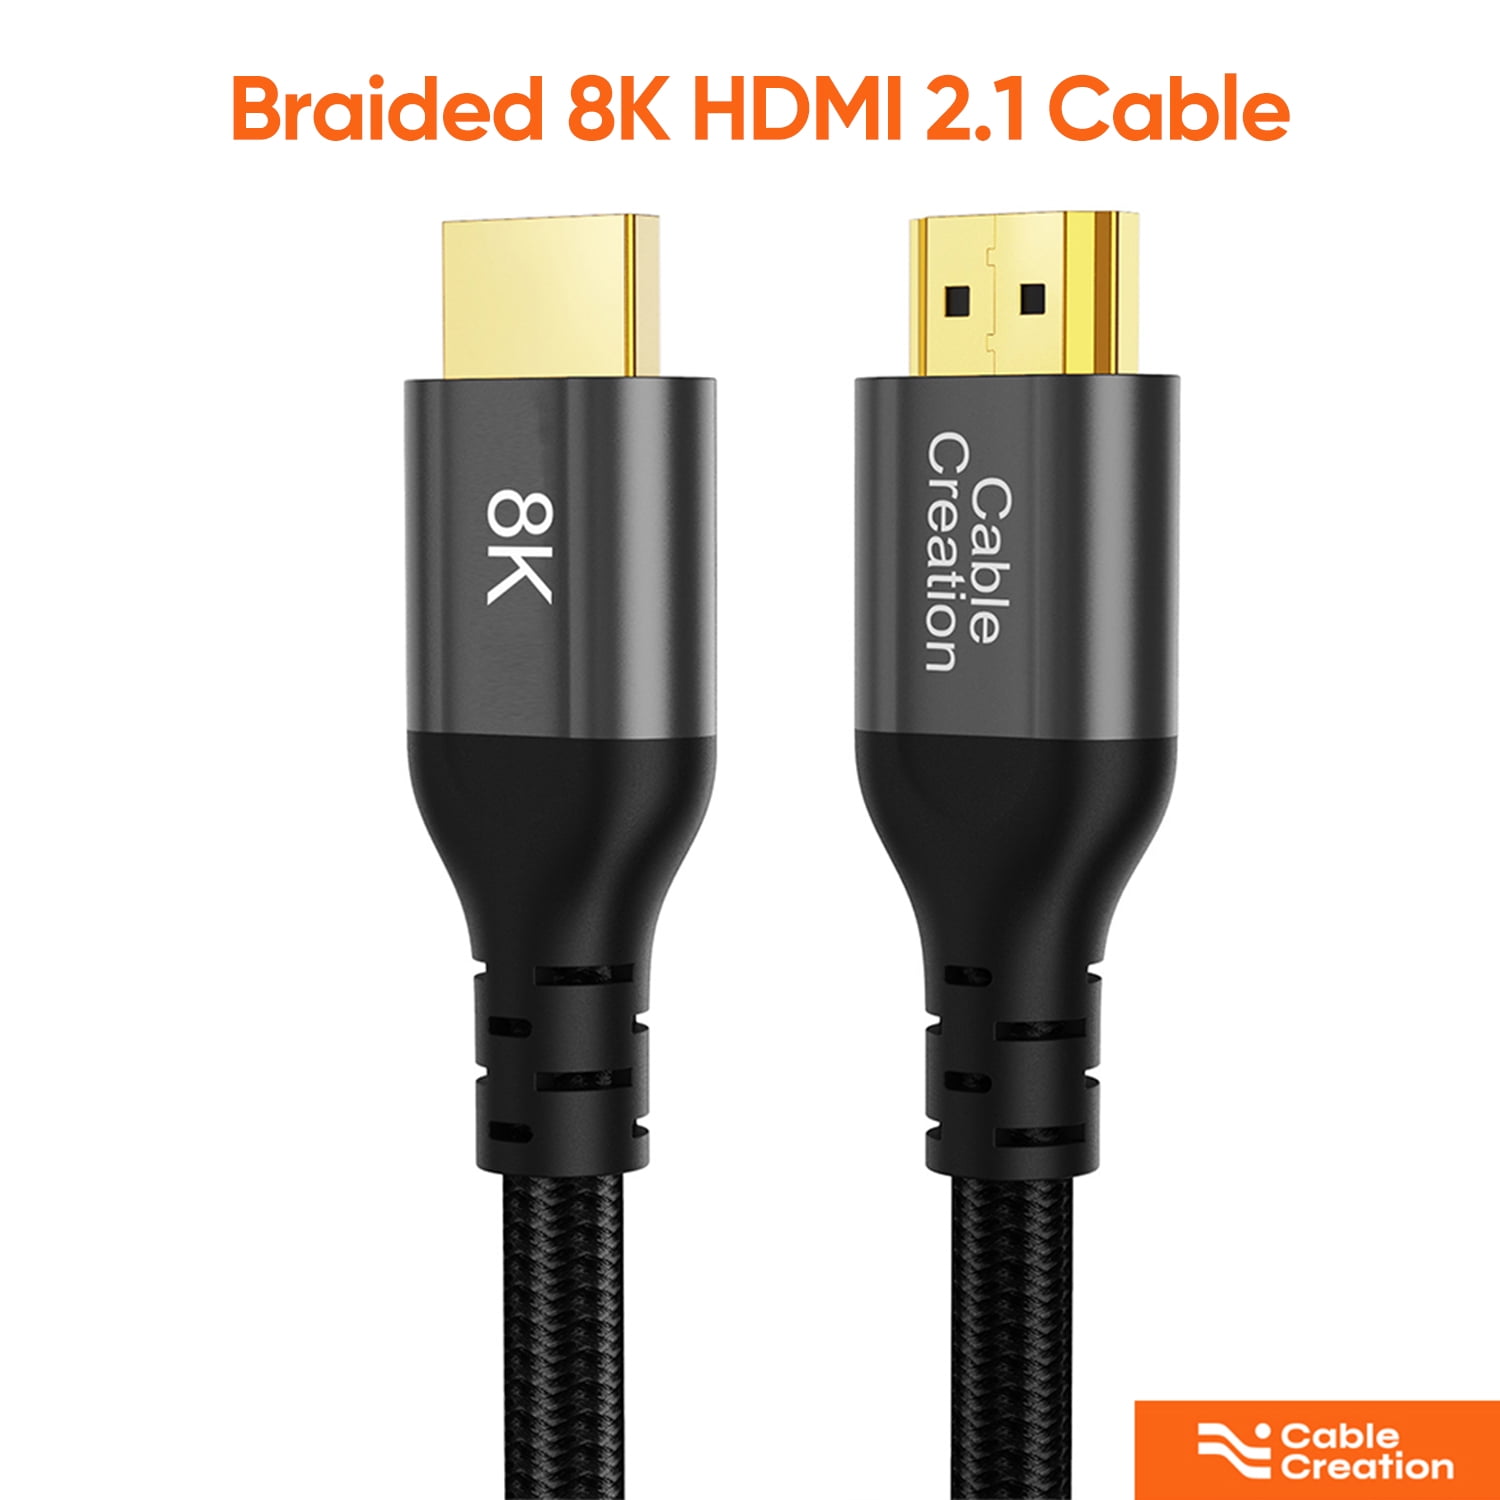 Droop vand I modsætning til CableCreation 8K HDMI Cable 3.3ft, 2.1 Ultra High Speed 48Gbps HDMI HDR  Male to Male Cable, Braided HDMI EARC Cord for Apple TV, Roku,  Xbox,Samsung, QLED, Sony, LG, Playstation, PS5, PS4 and